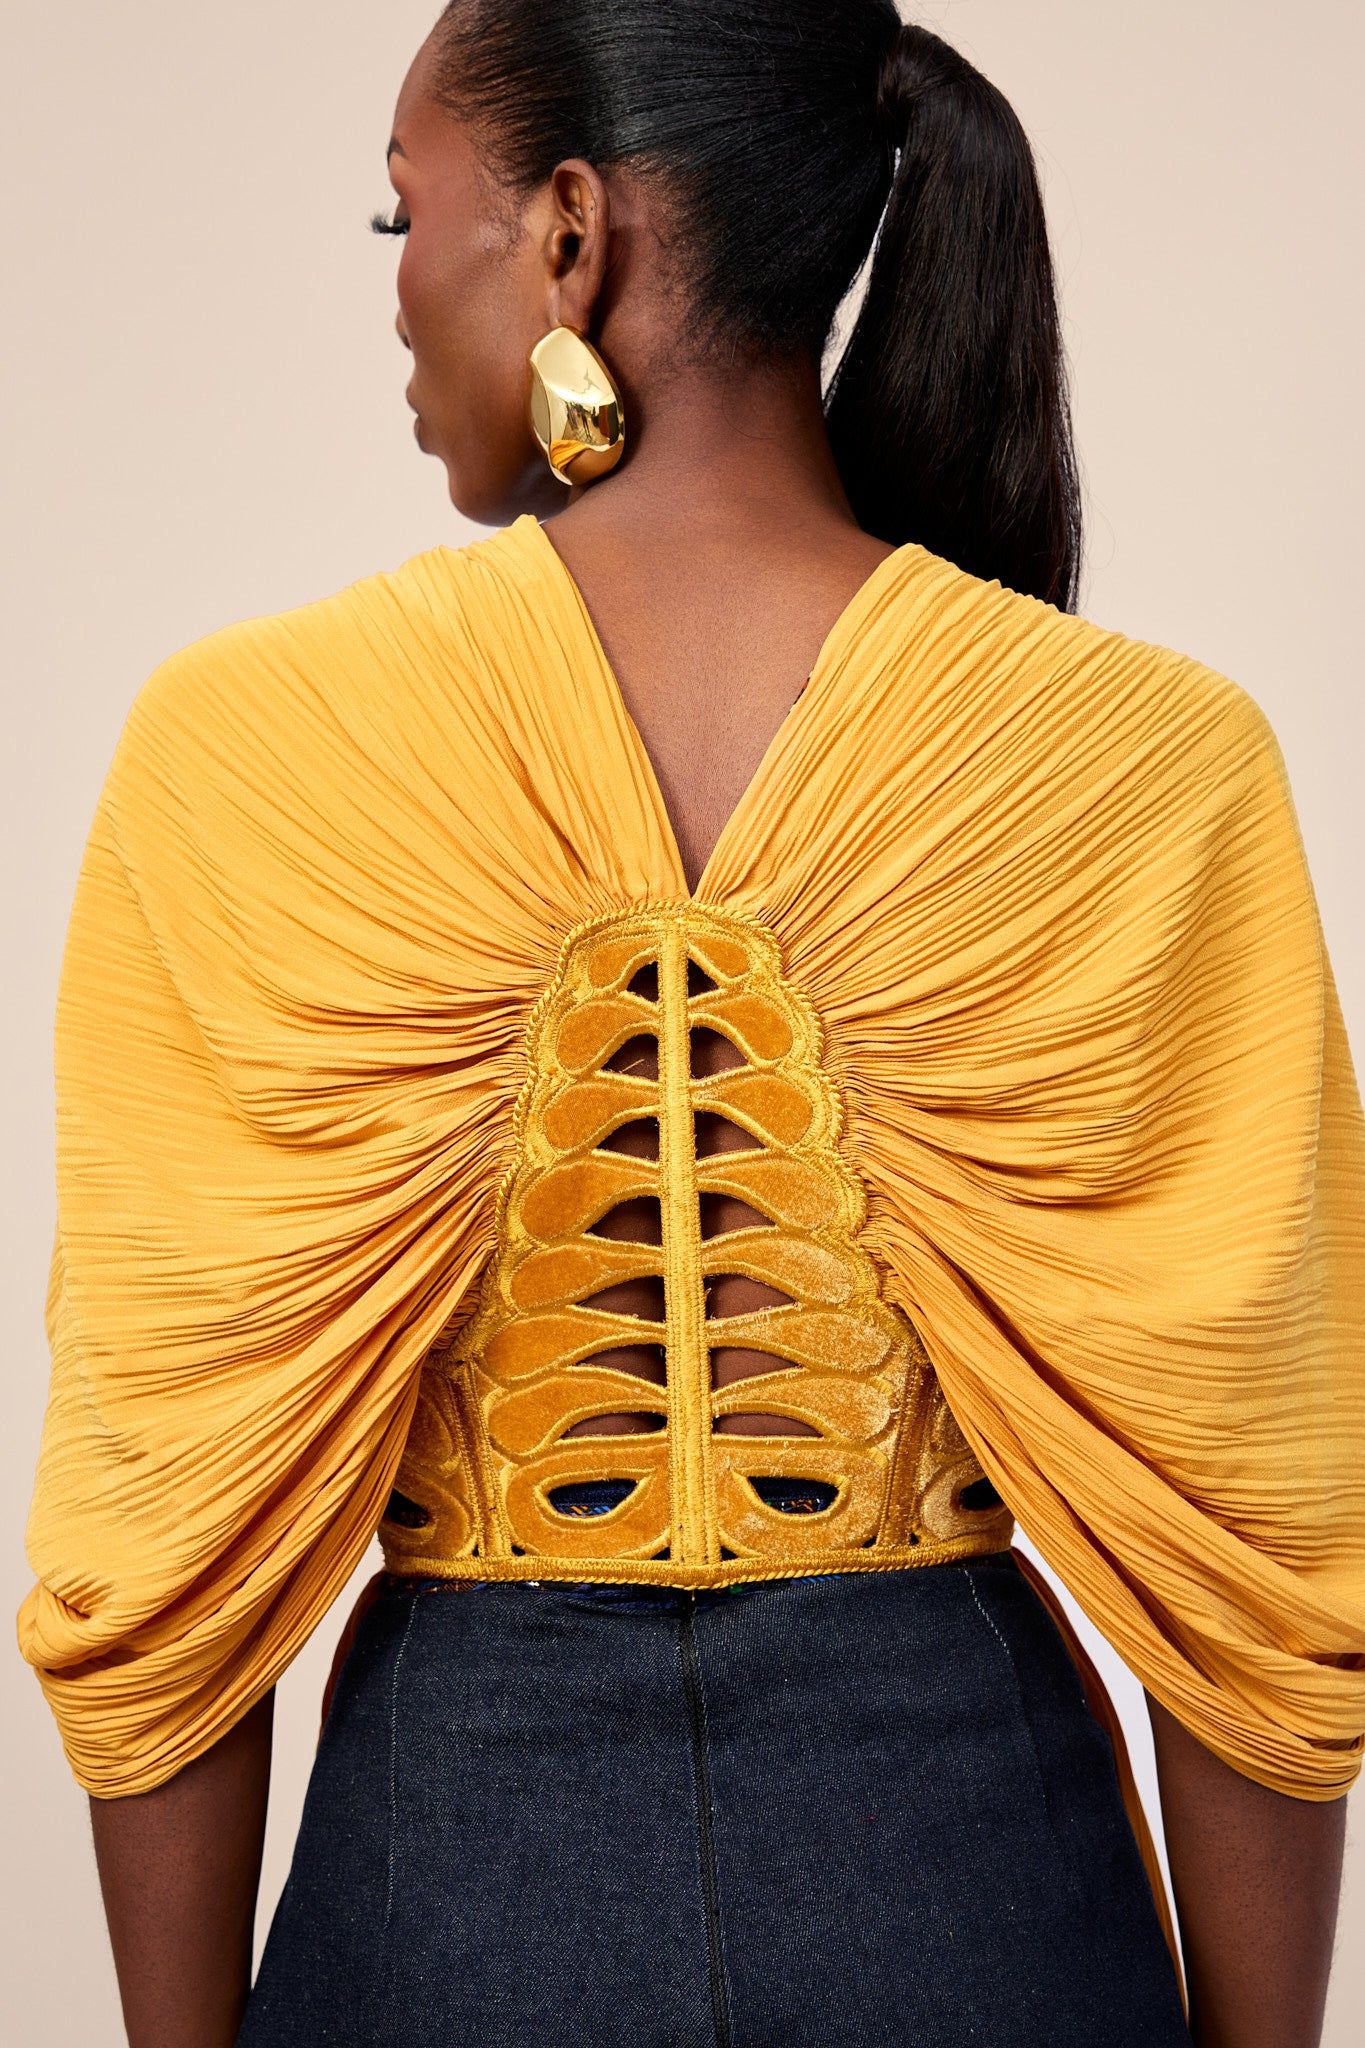 Corset Blouses: Embrace Vintage Glamour with Modern Silhouettes